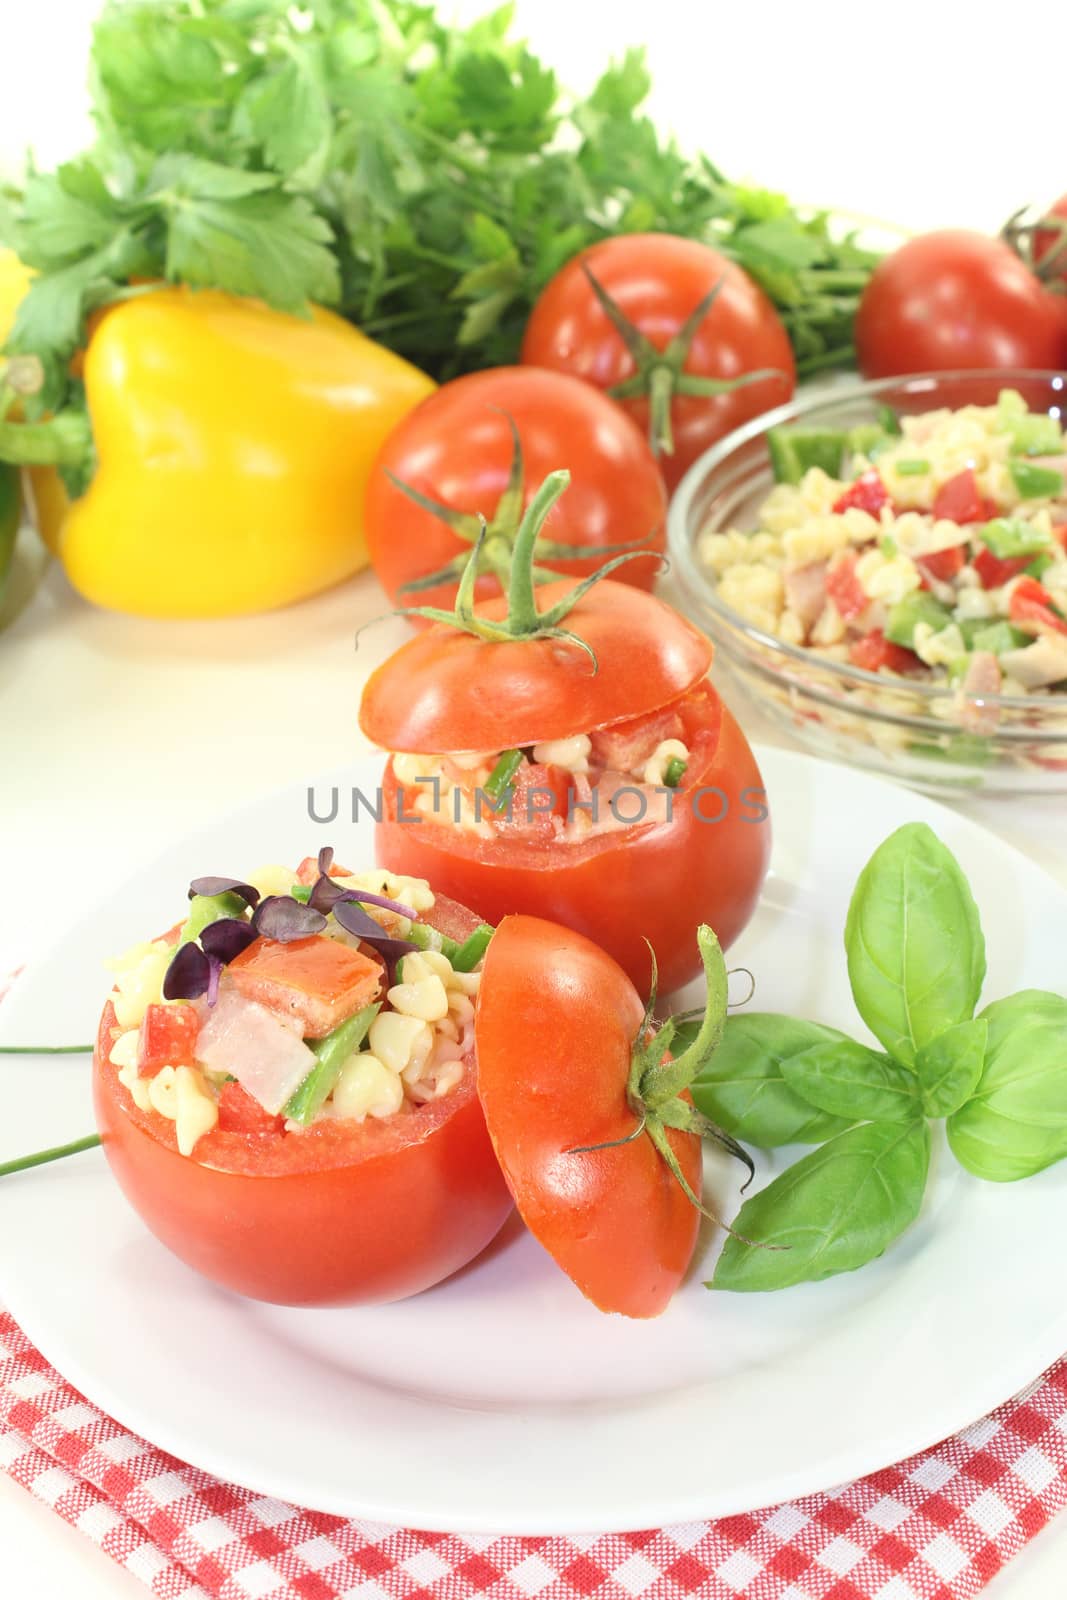 stuffed Tomatoes with pasta salad by discovery